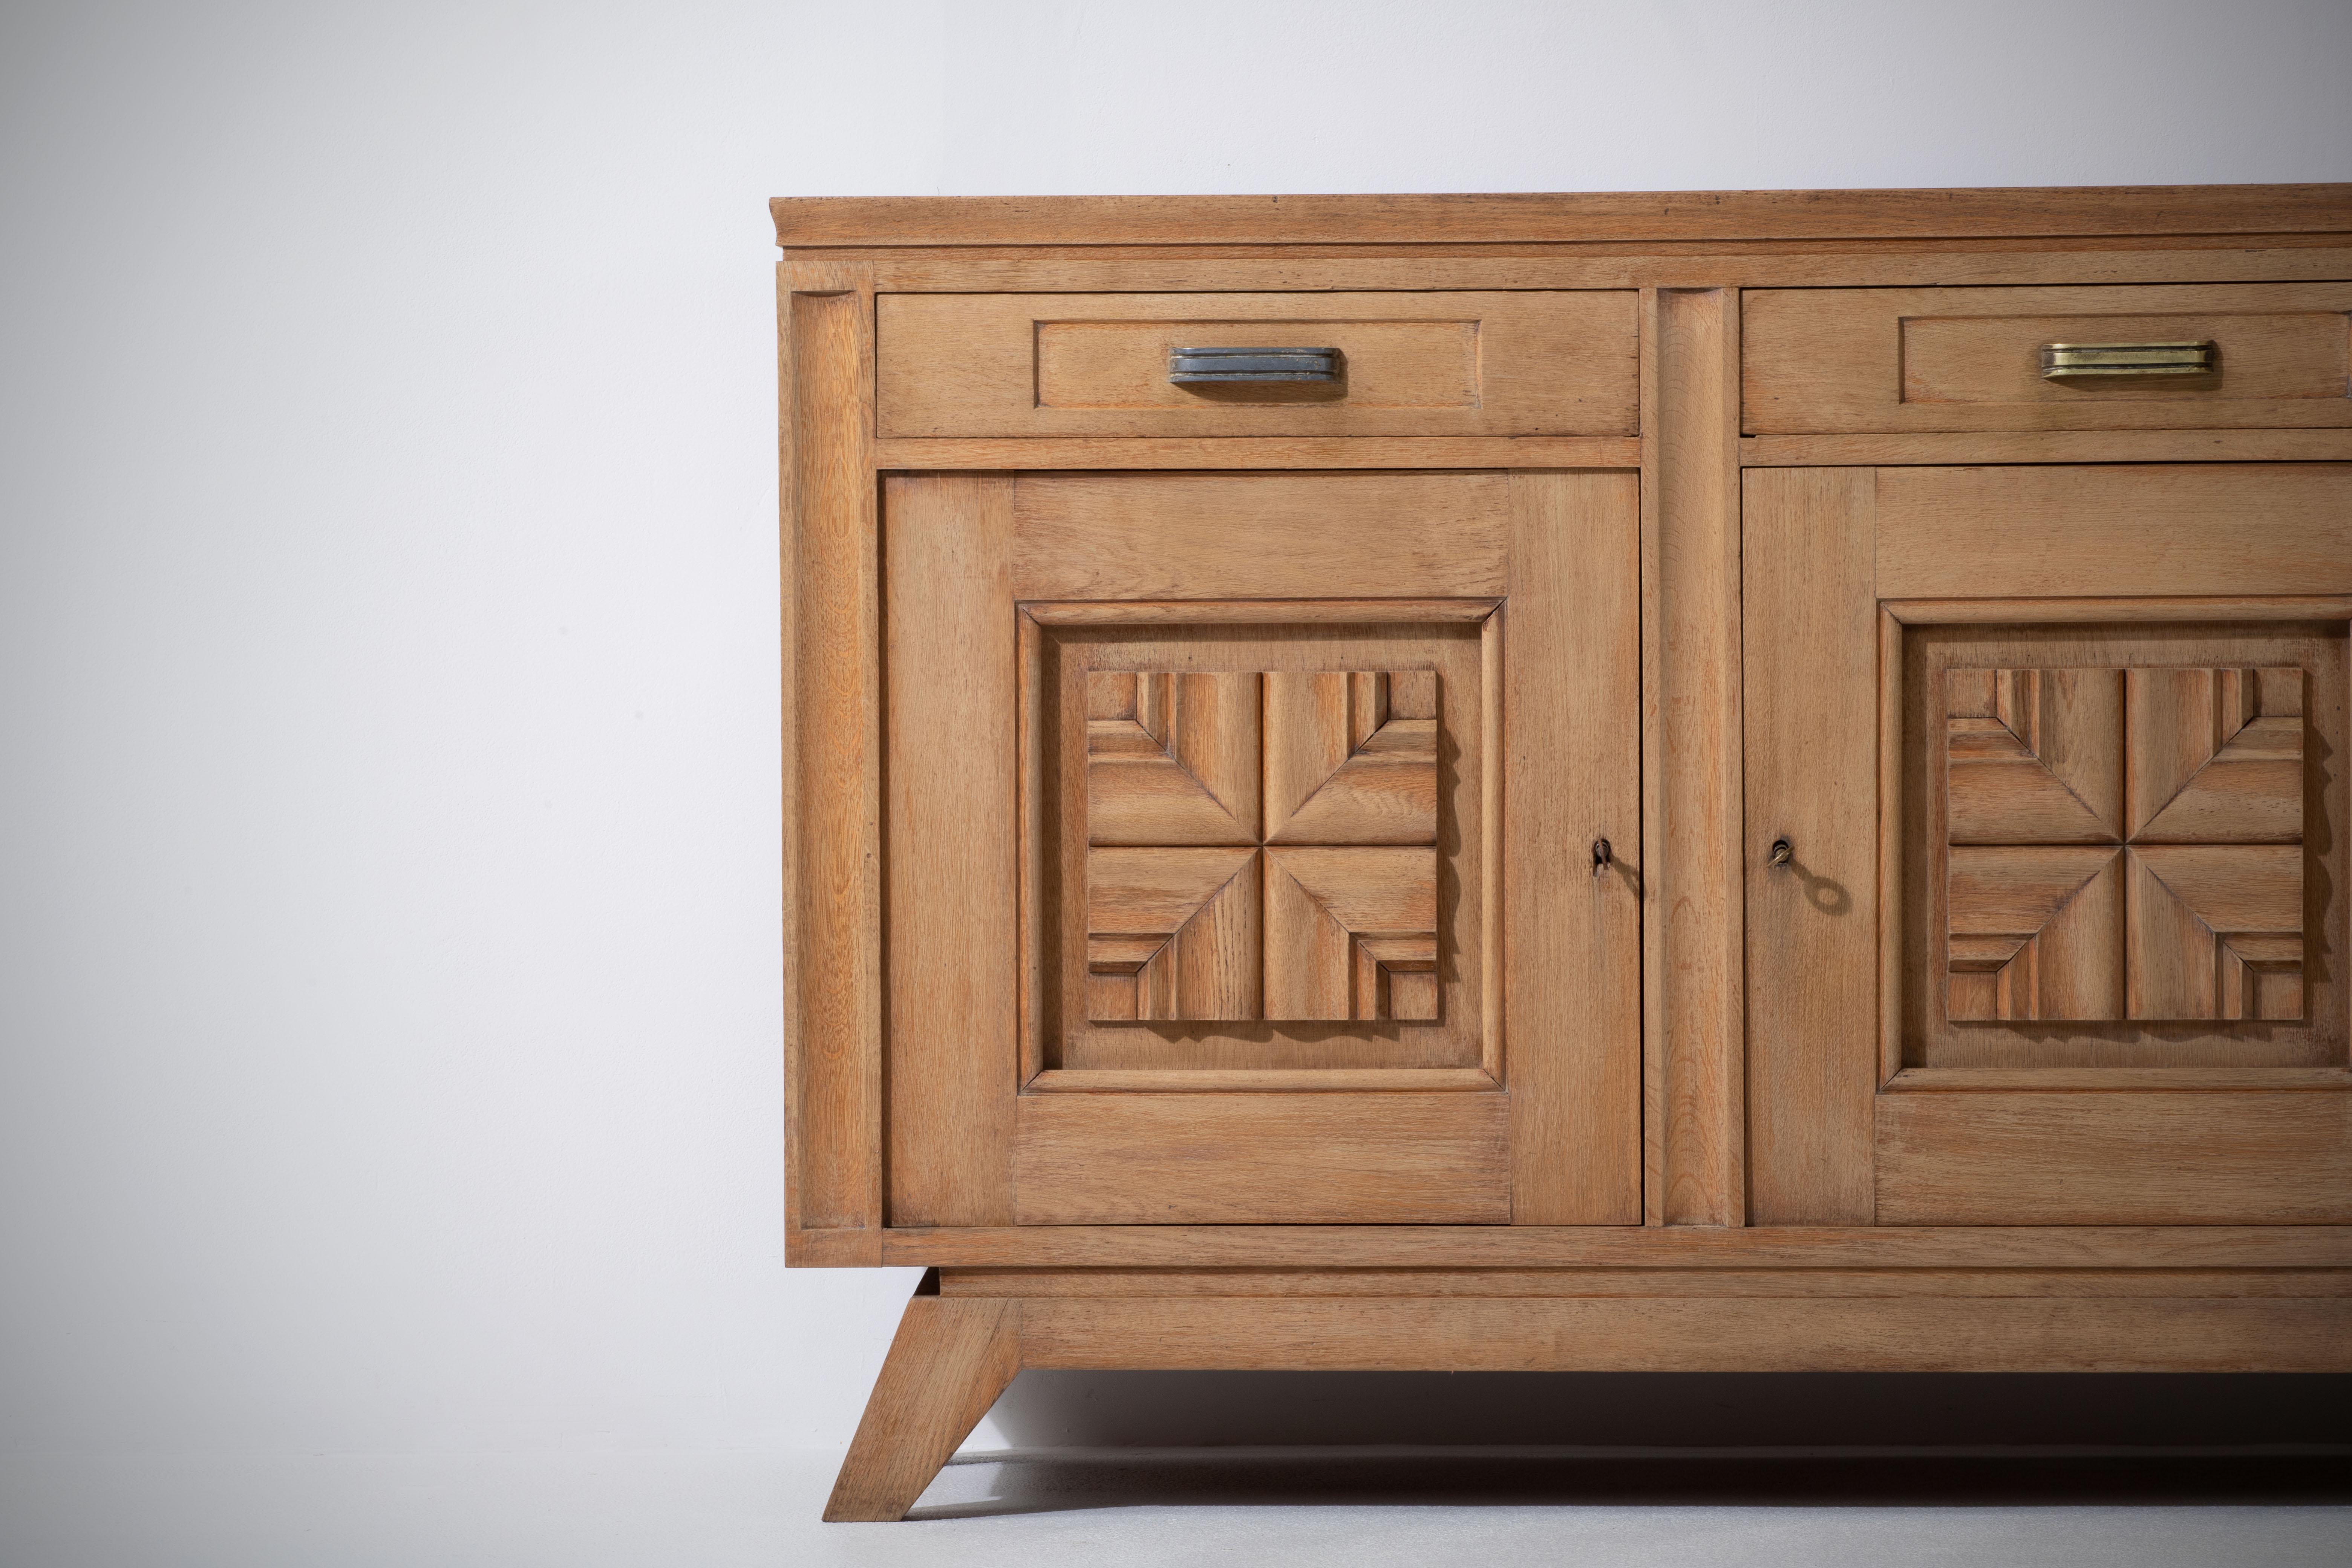 Bleached Solid Oak Cabinet with Graphic Details, France, 1940s For Sale 6